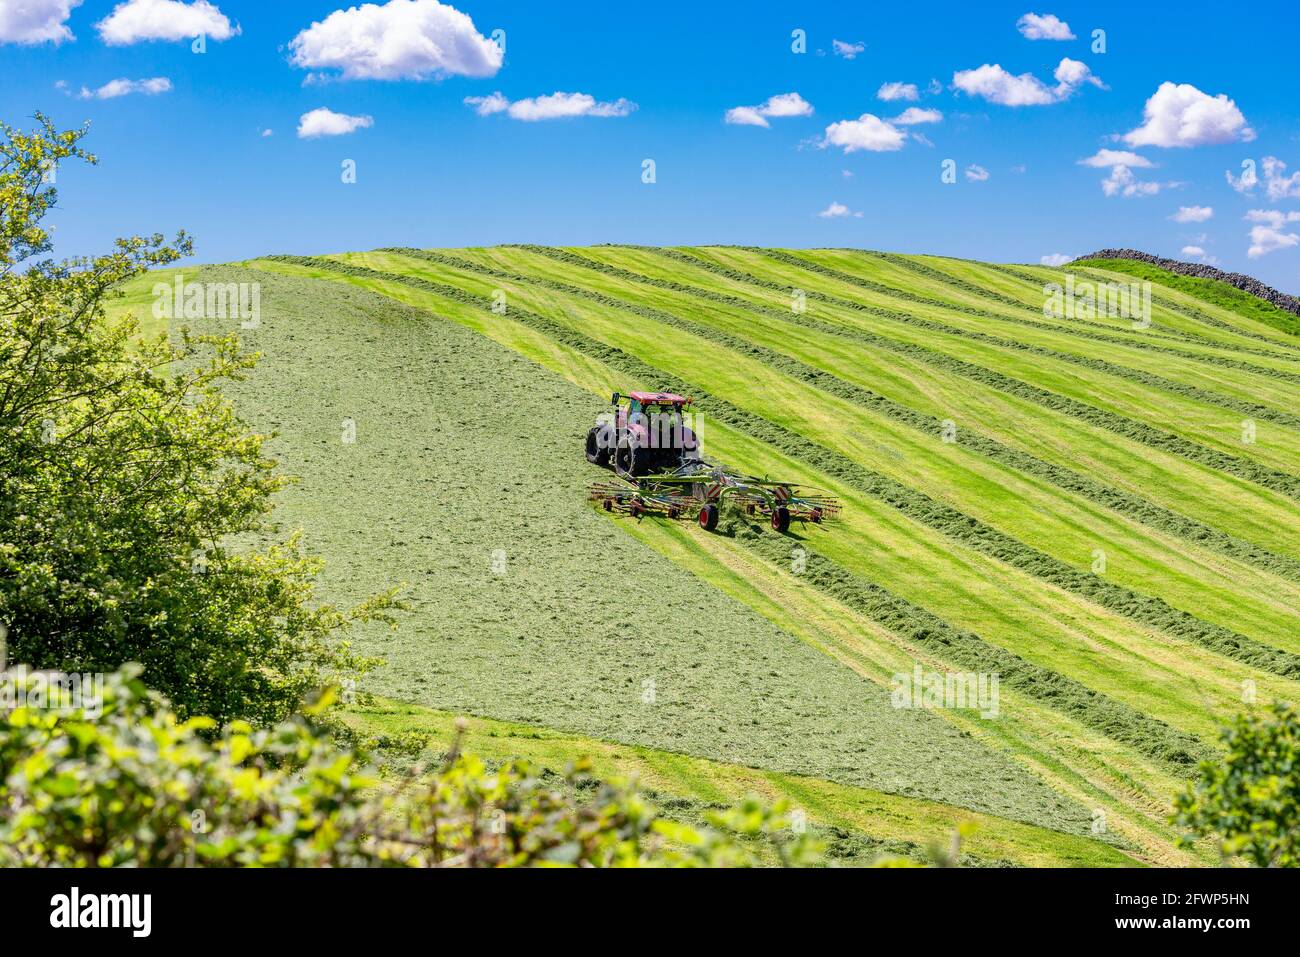 Raking a field of cut grass for silage on a farm, Silverdale, Carnforth, Lancashire, UK Stock Photo